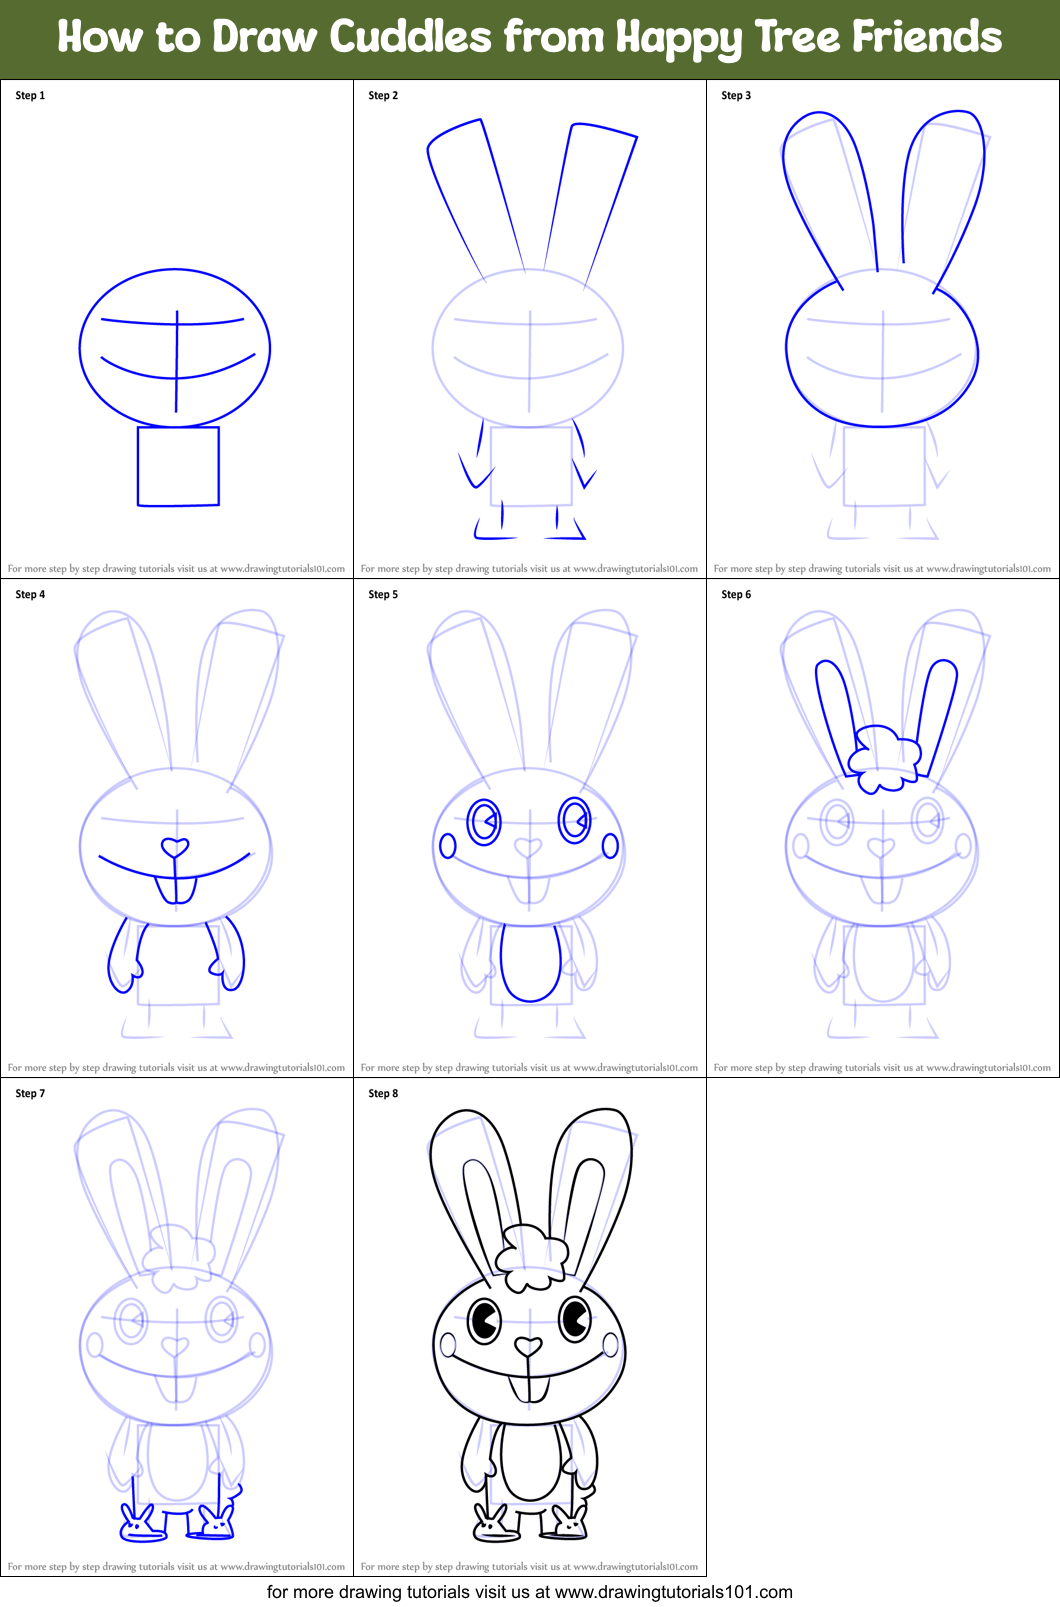 How to Draw Cuddles from Happy Tree Friends printable step by step